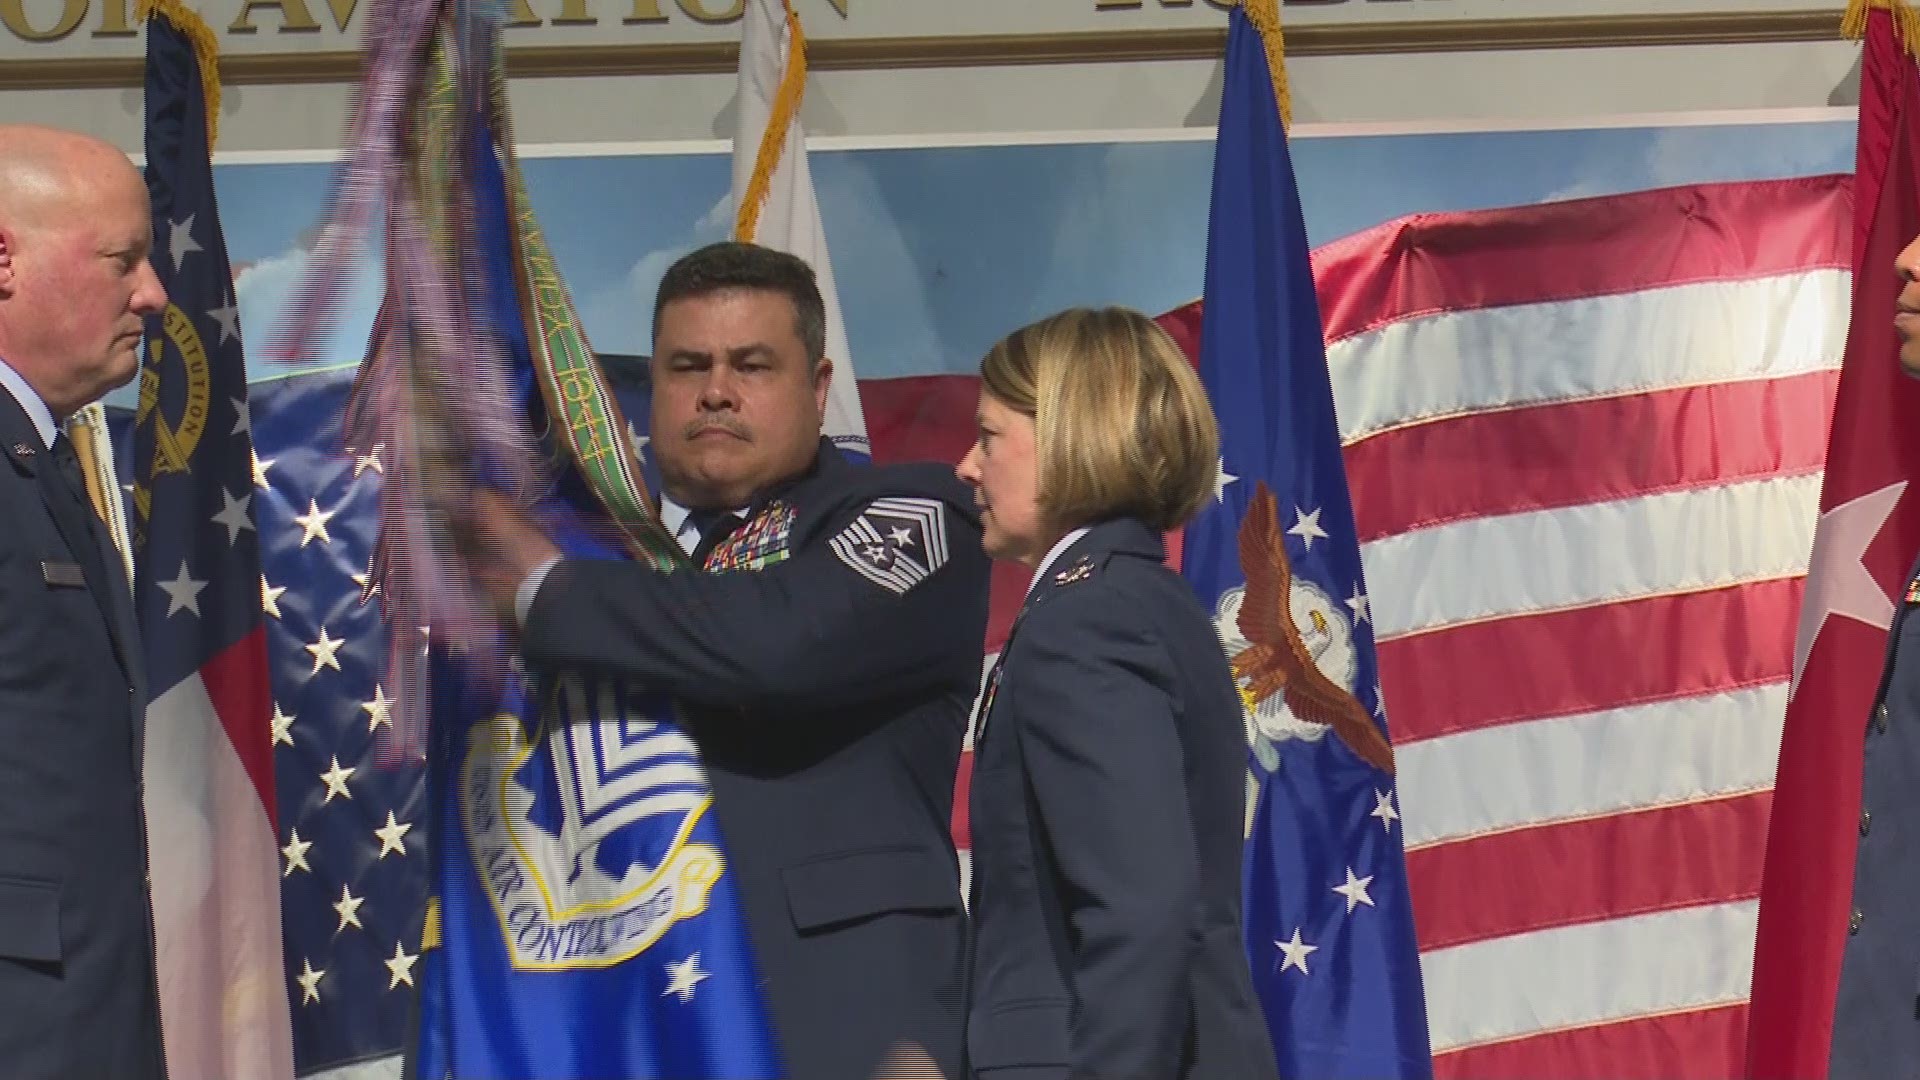 Col. Amy Holbeck made history as the first female wing commander in the Georgia Air National Guard.